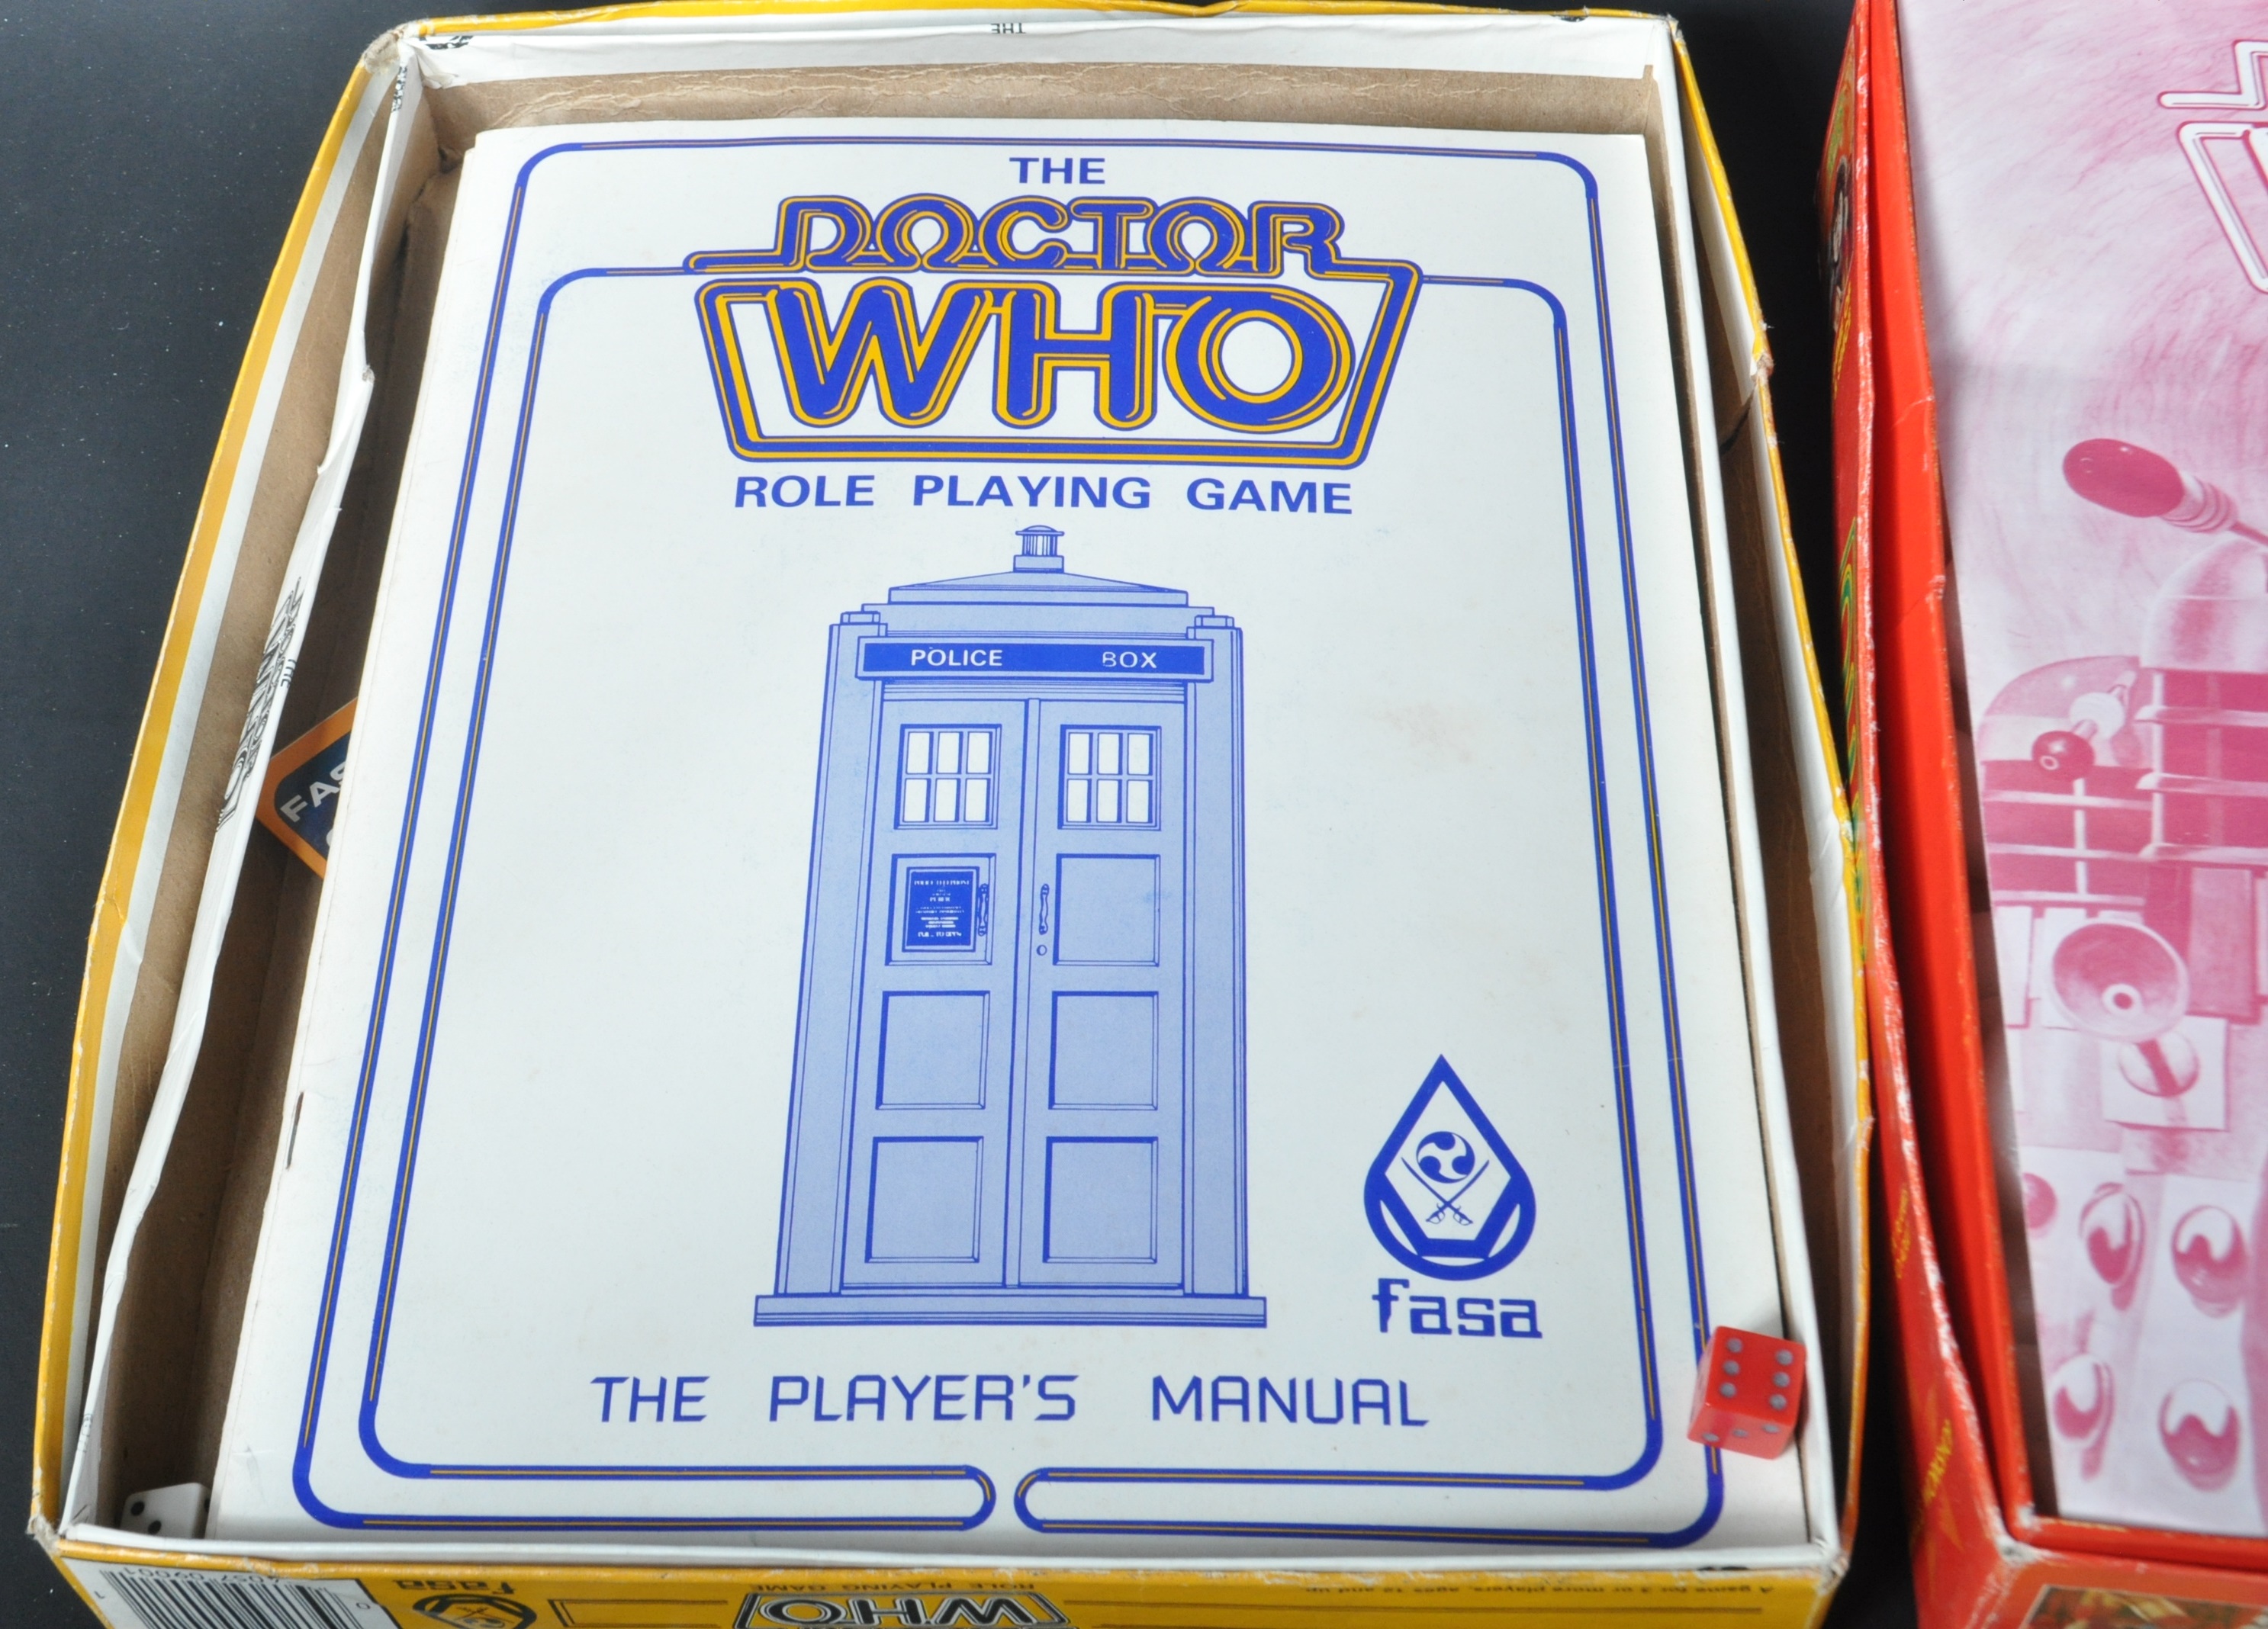 DOCTOR WHO - COLLECTION OF VINTAGE GAMES & PUZZLES - Image 2 of 6